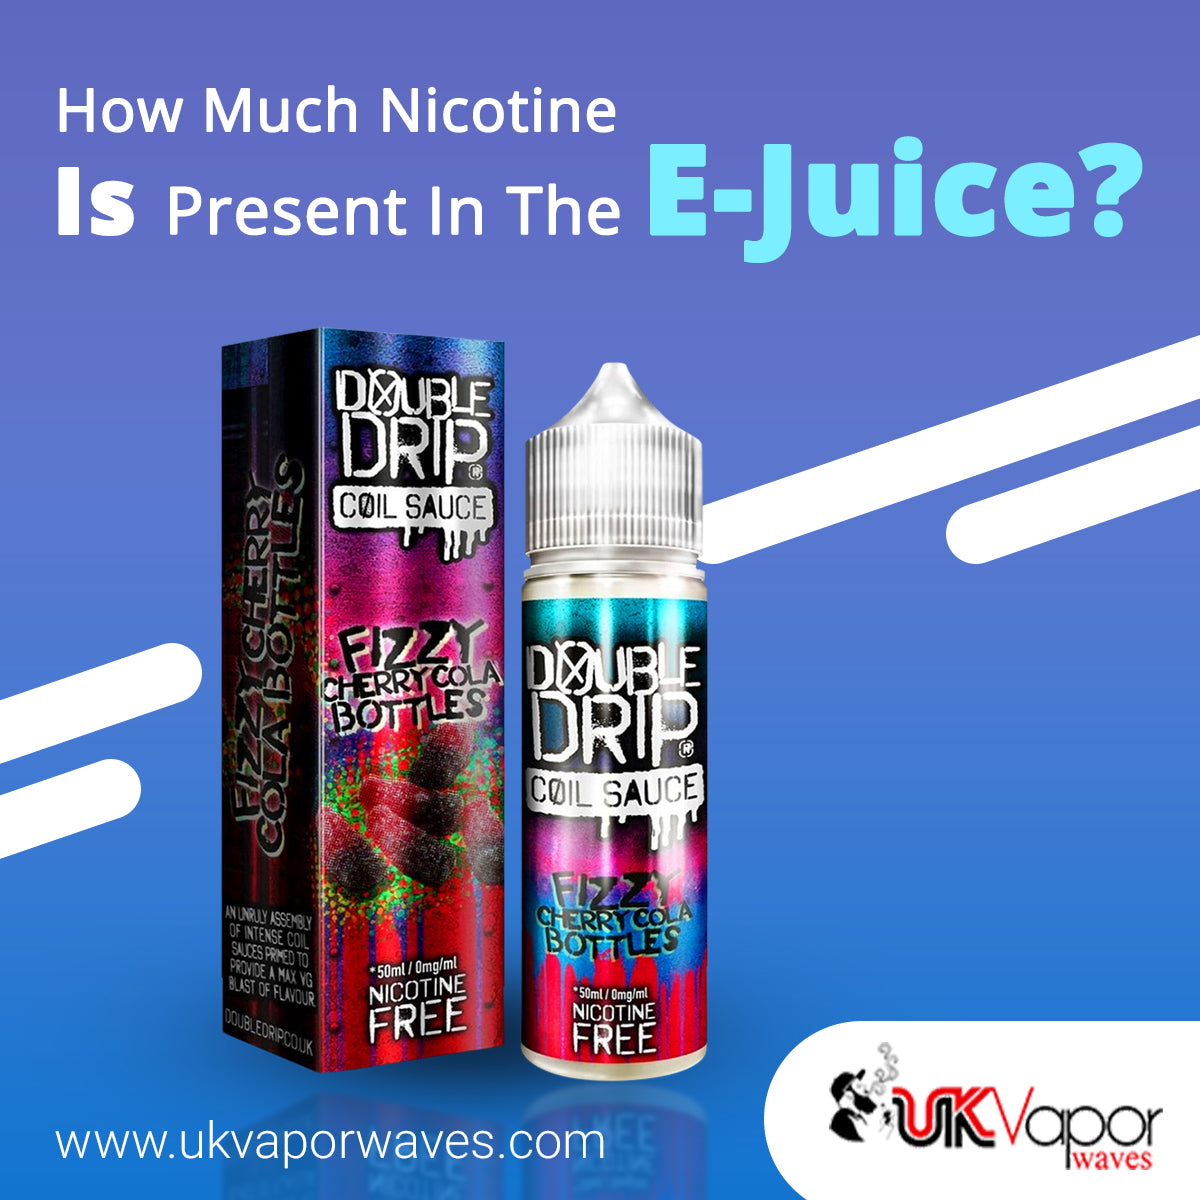 How Much Nicotine Is Present In The E-Juice?